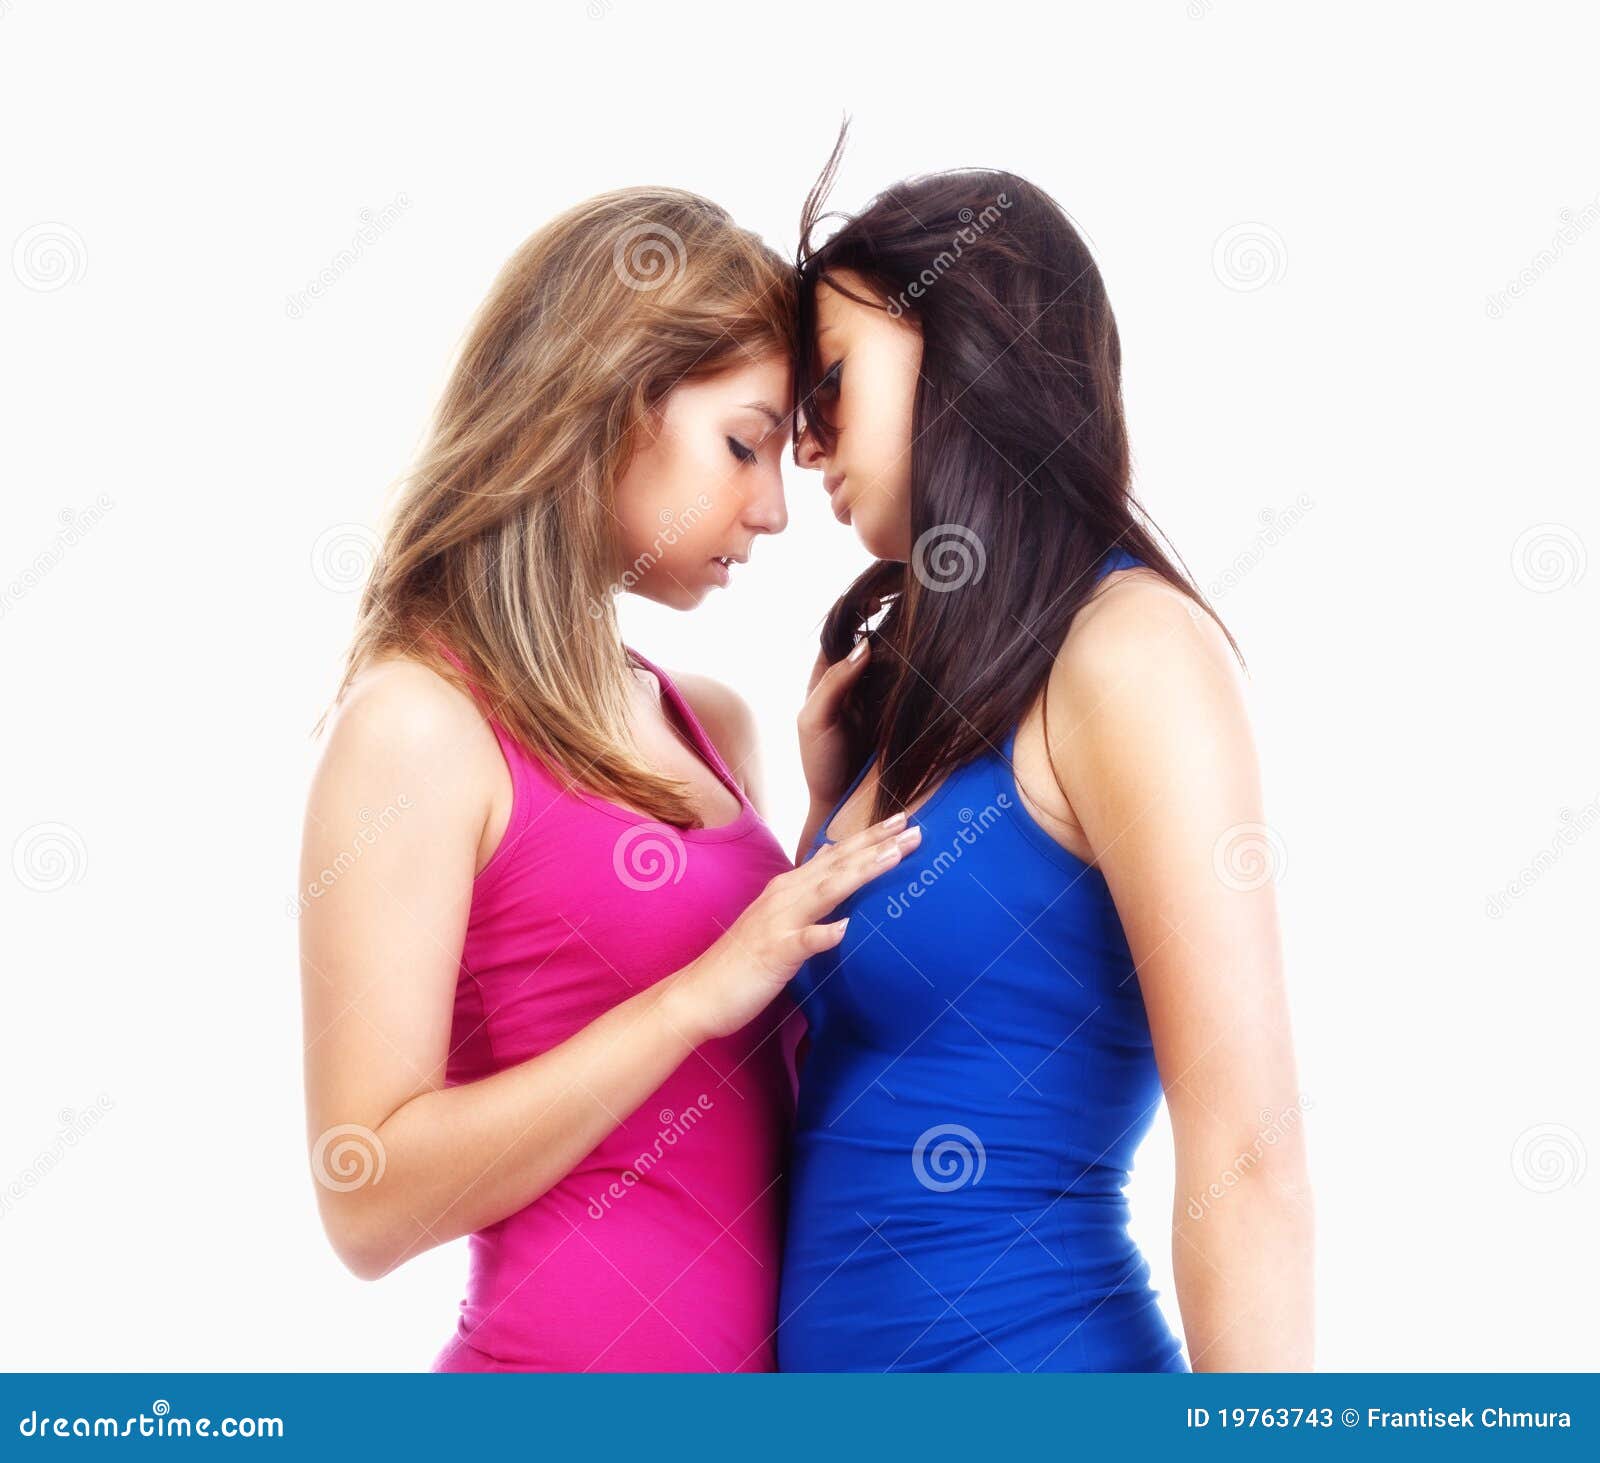 Photo about Two young beutiful women standing touching each other - isolate...